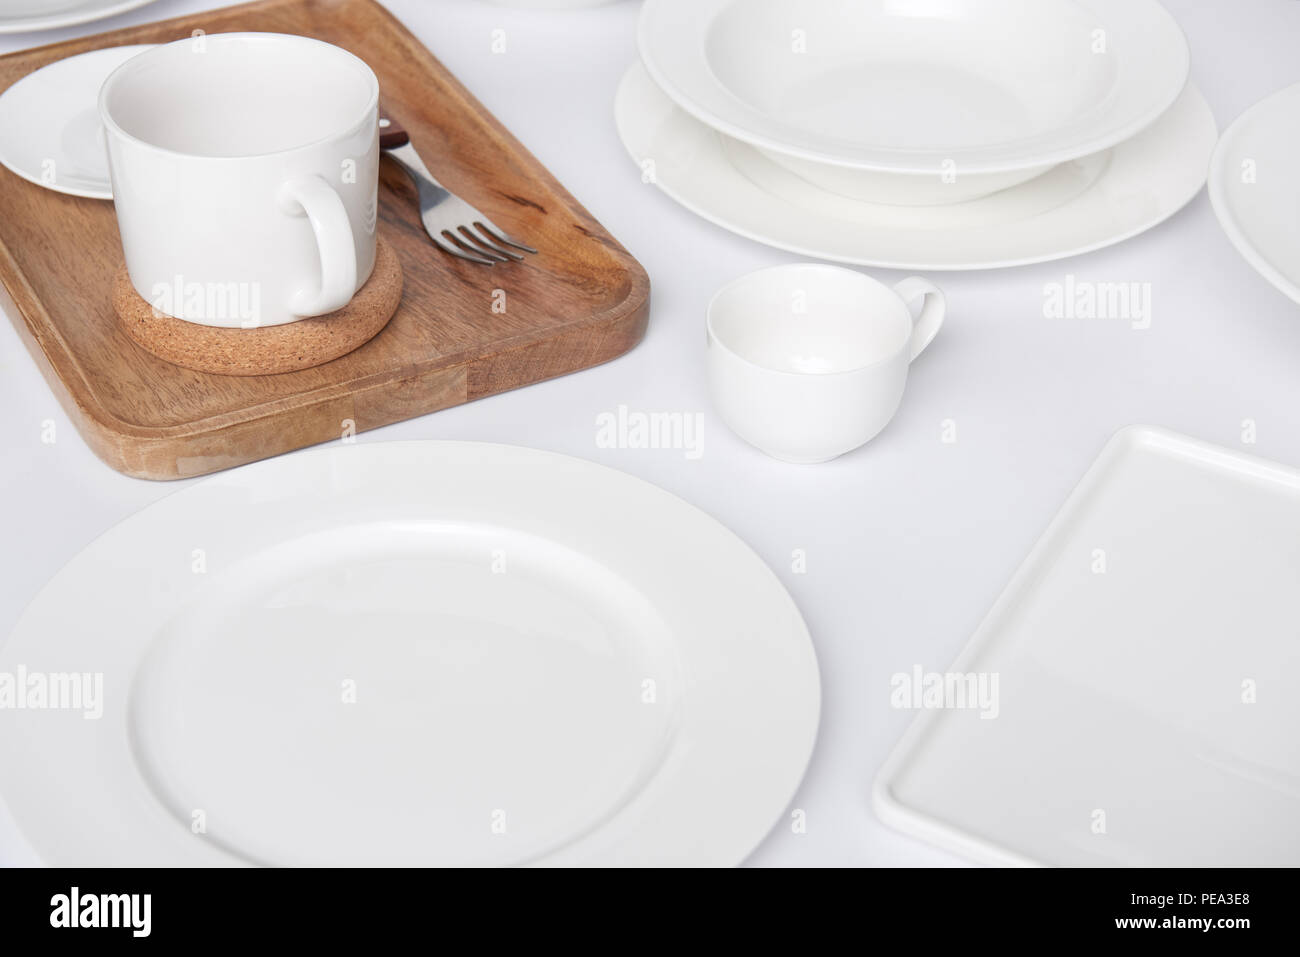 close up view of wooden tray, fork with various plates and cup with bowl on white table Stock Photo